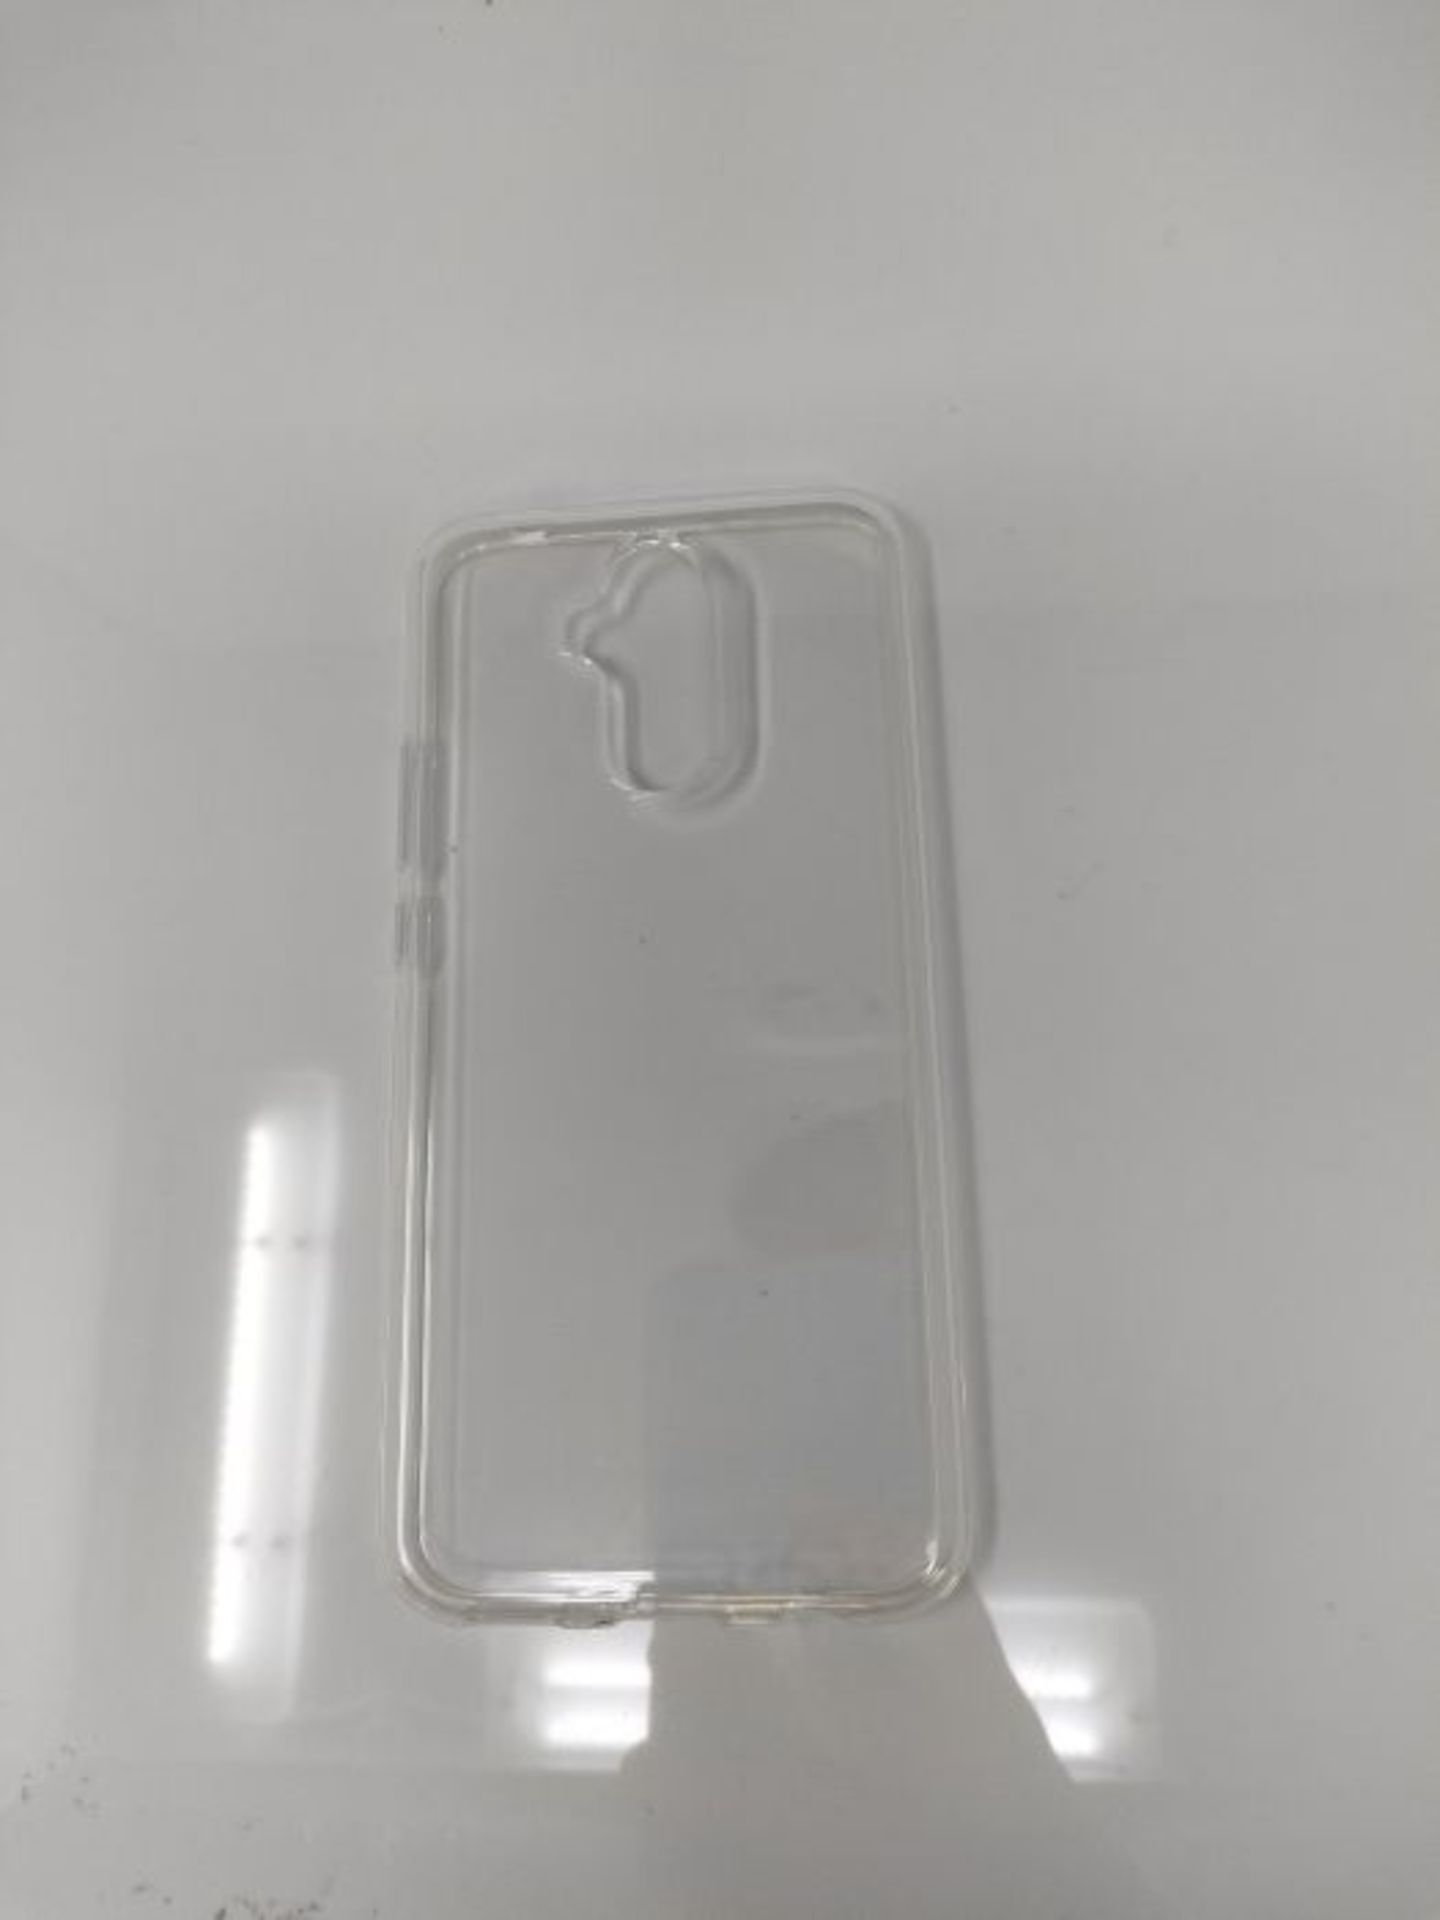 Soft TPU Transparent Fit Protector Case for Huawei Mate 20 Lite, Anti Slip, Scratch Re - Image 3 of 3